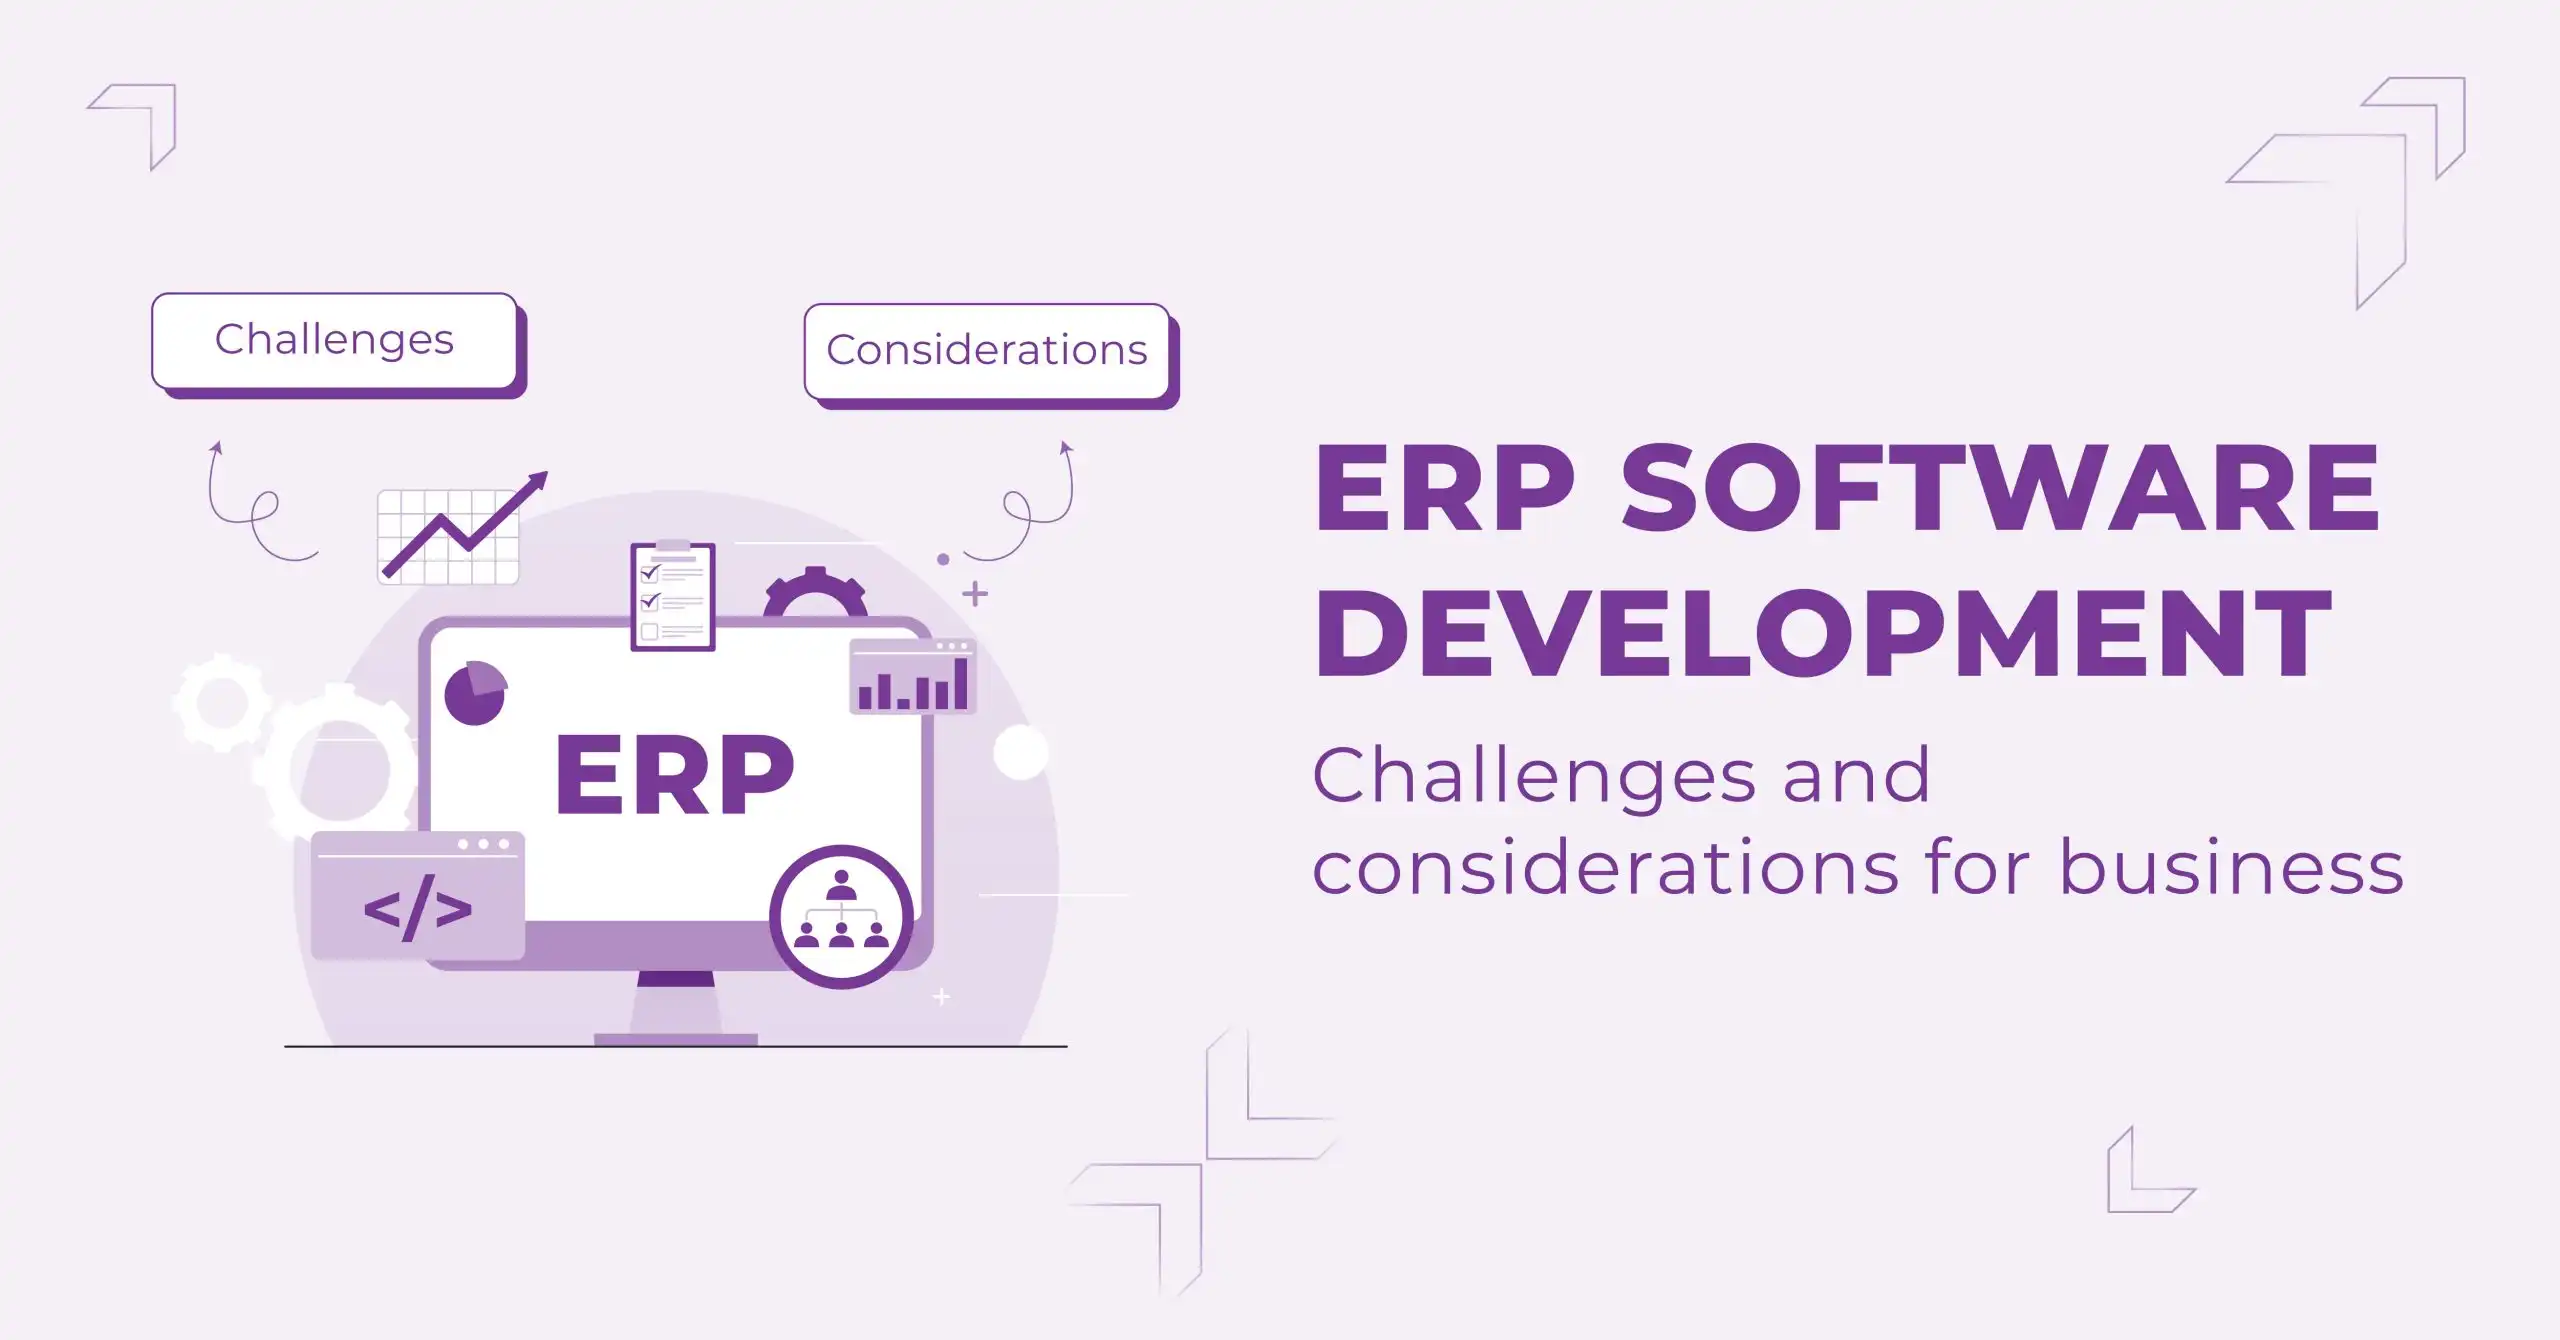 ERP-software-development-Challenges-and-considerations-for-business-1